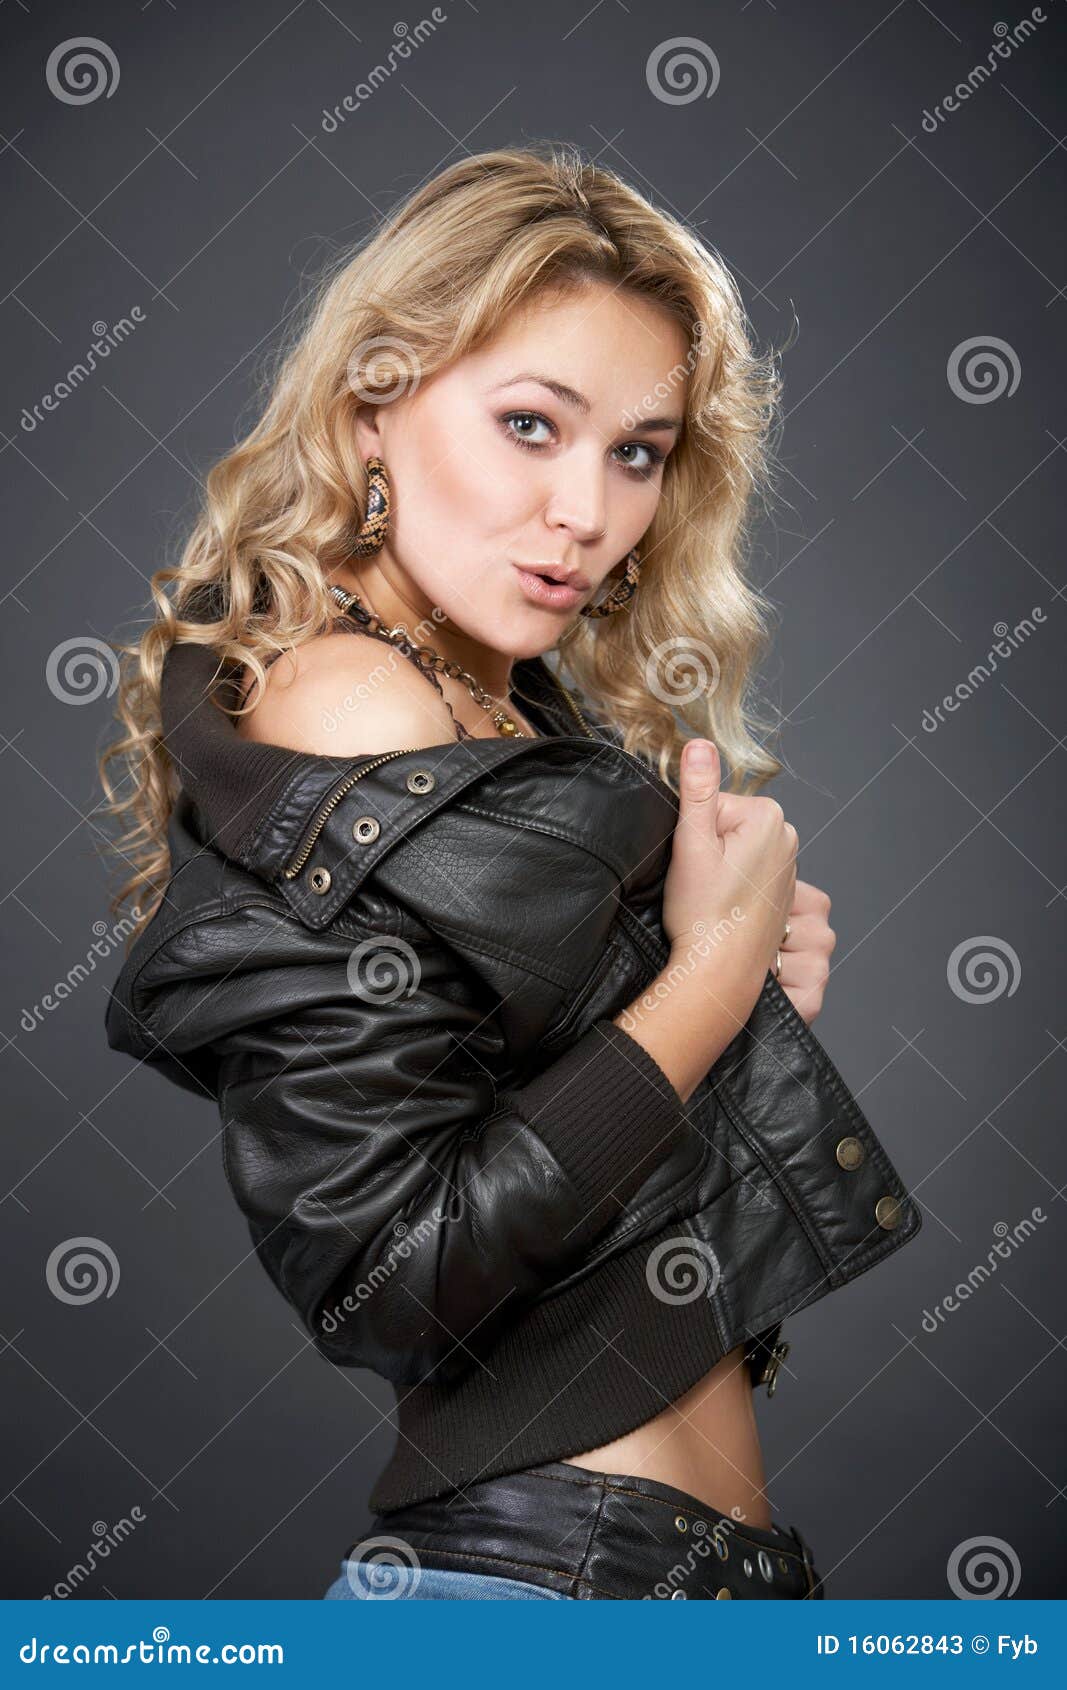 Woman in a Leather Jacket and Jeans Skirt Stock Image - Image of ...